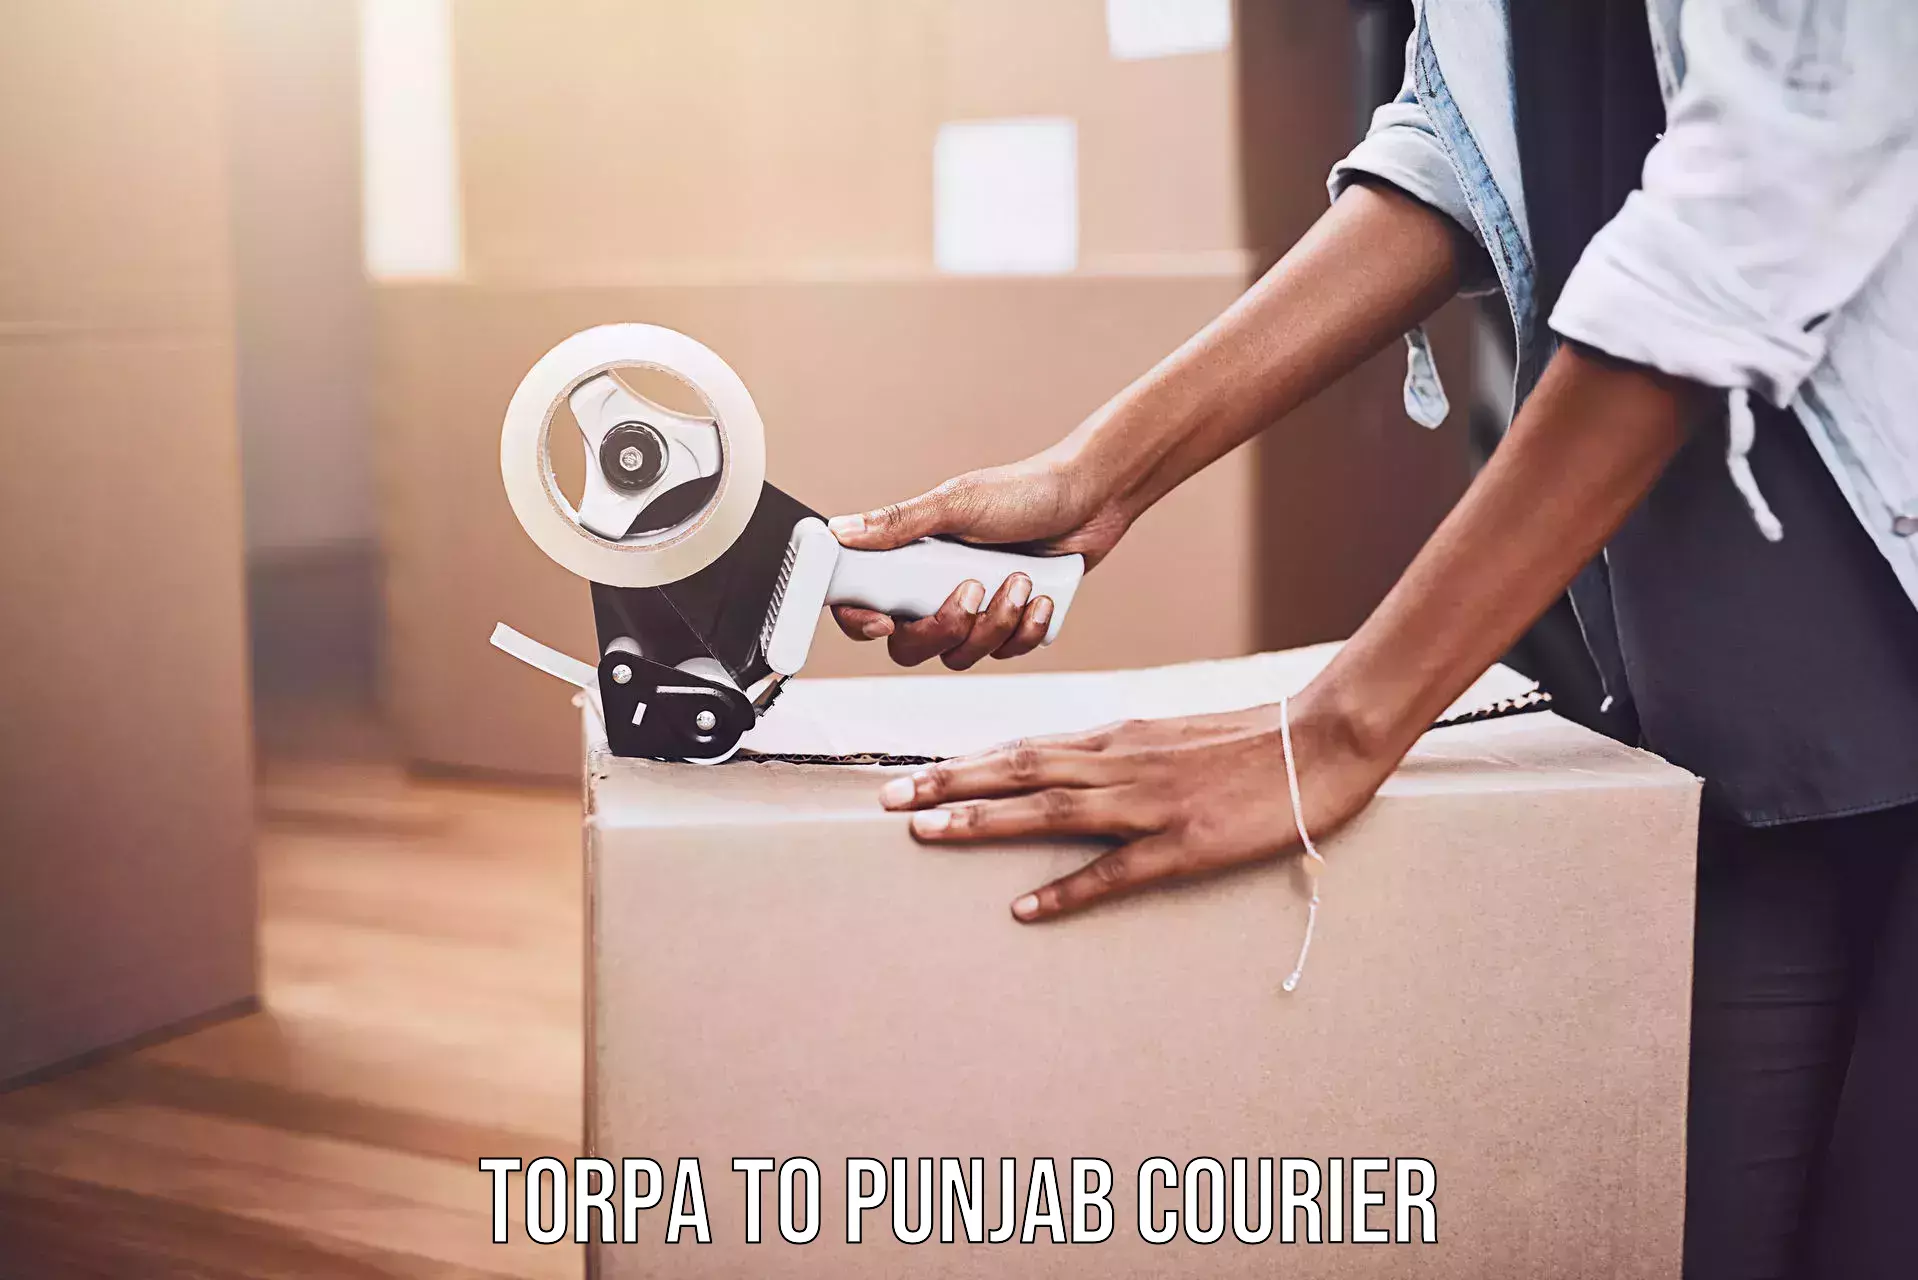 Next-day freight services Torpa to Punjab